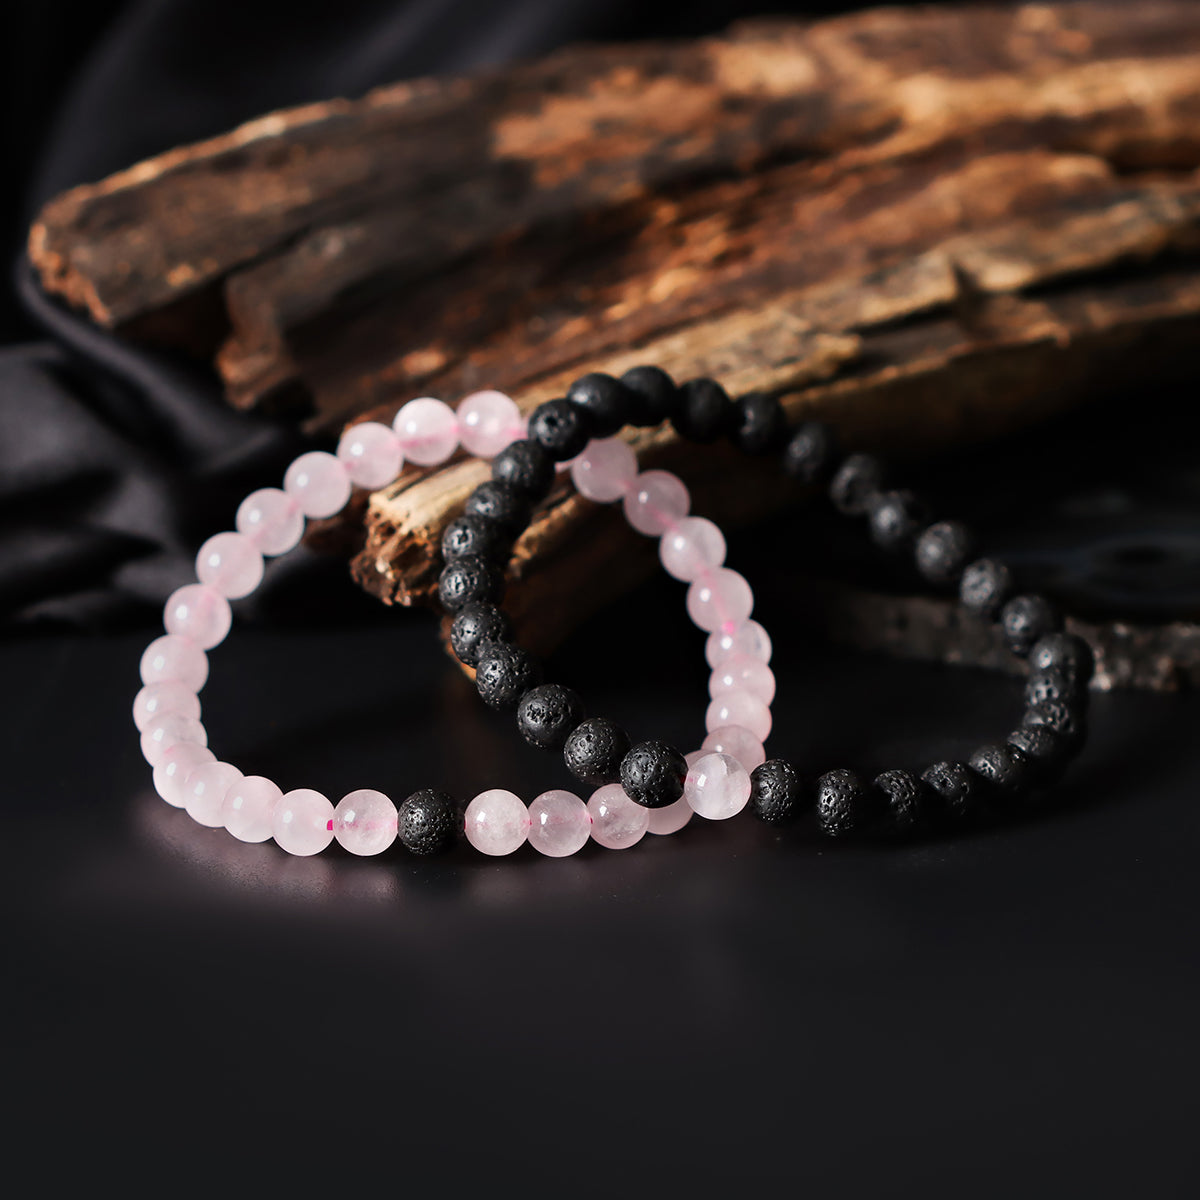 Artistic close-up of the Natural Rose Quartz & Lava Gemstone Bracelet. A captivating shot capturing the soft pink hues of Rose Quartz and the raw elegance of lava gemstones, creating a unique and eye-catching composition